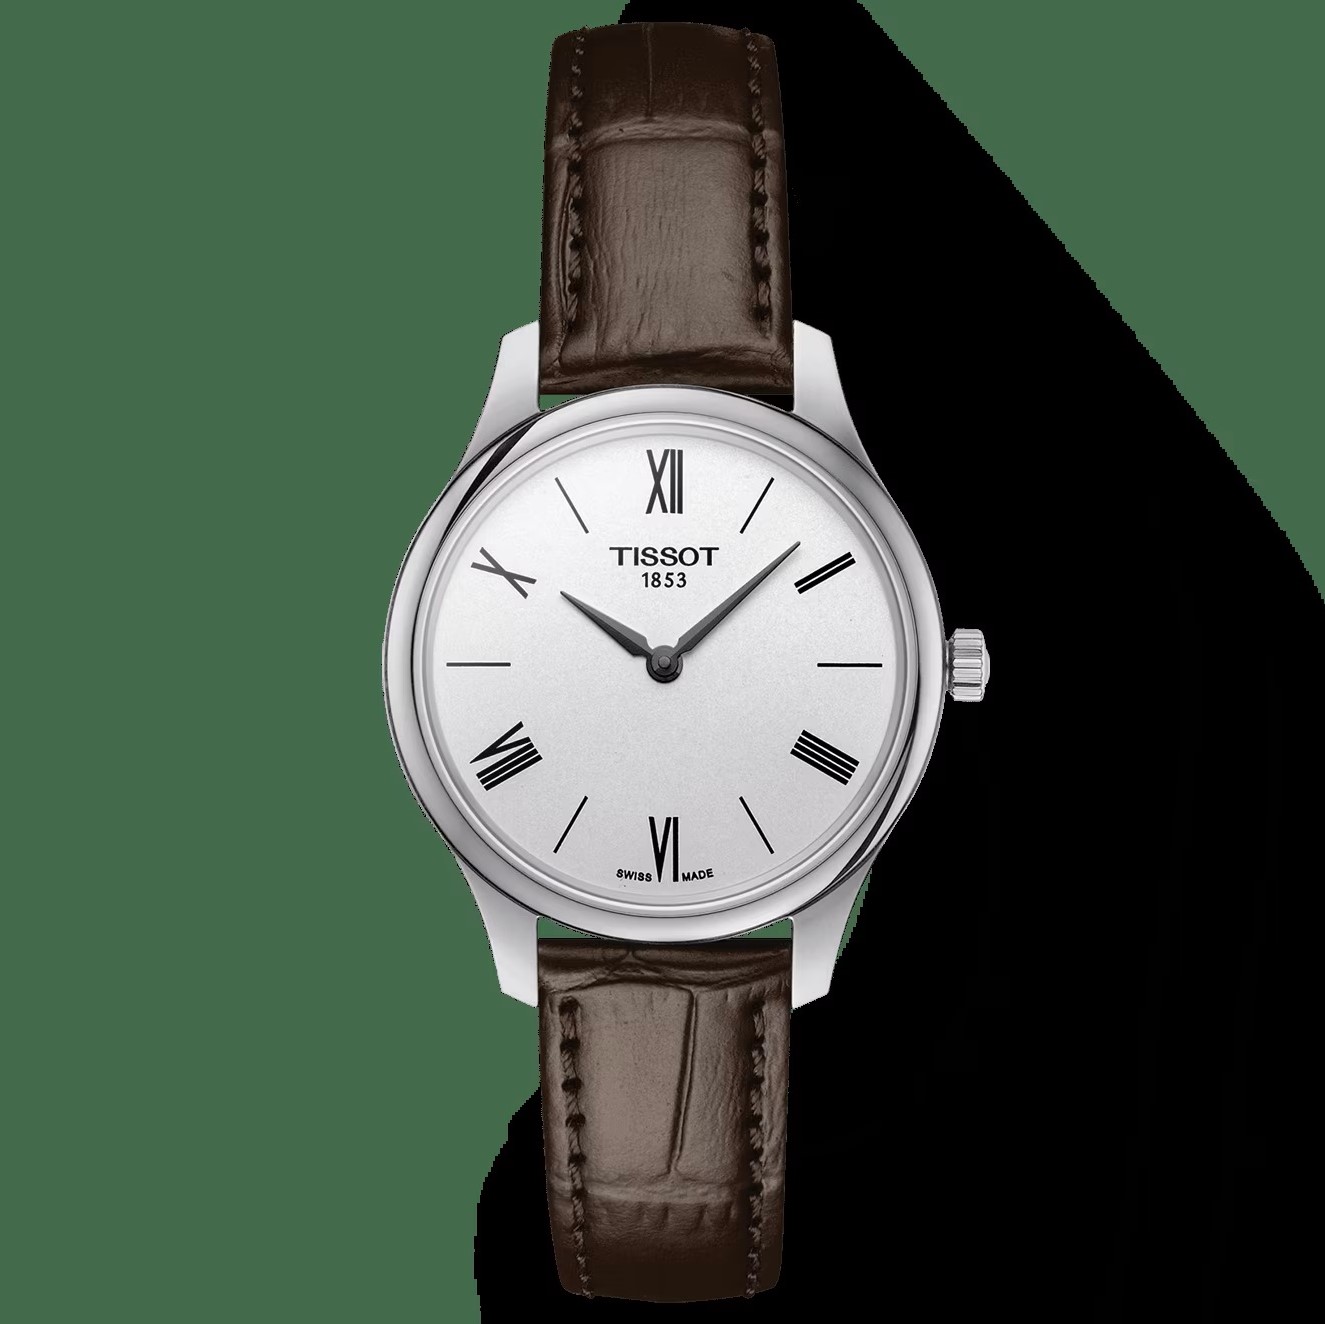 ĐỒNG HỒ NỮ DÂY DA TISSOT TRADITION 5.5 LADY T063.209.16.038.00 WRISTWATCH FOR WOMEN 10